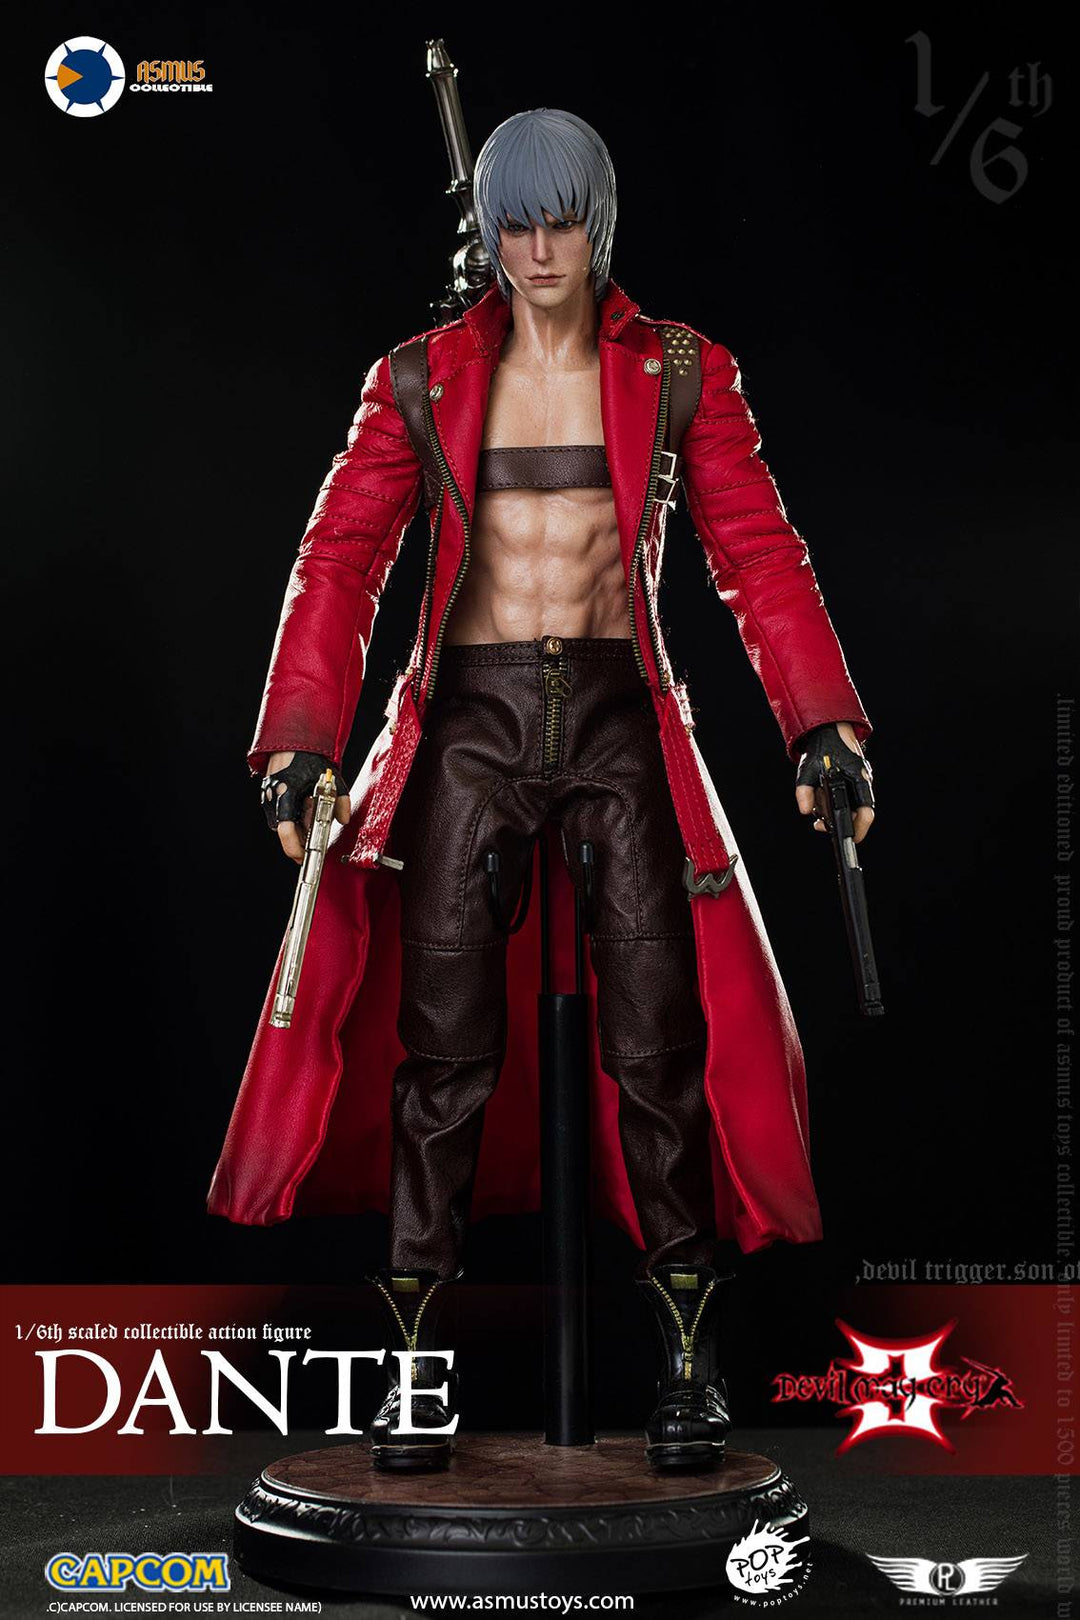 Devil May Cry Pop Up Store Will Sell Exclusive Dante Merchandise